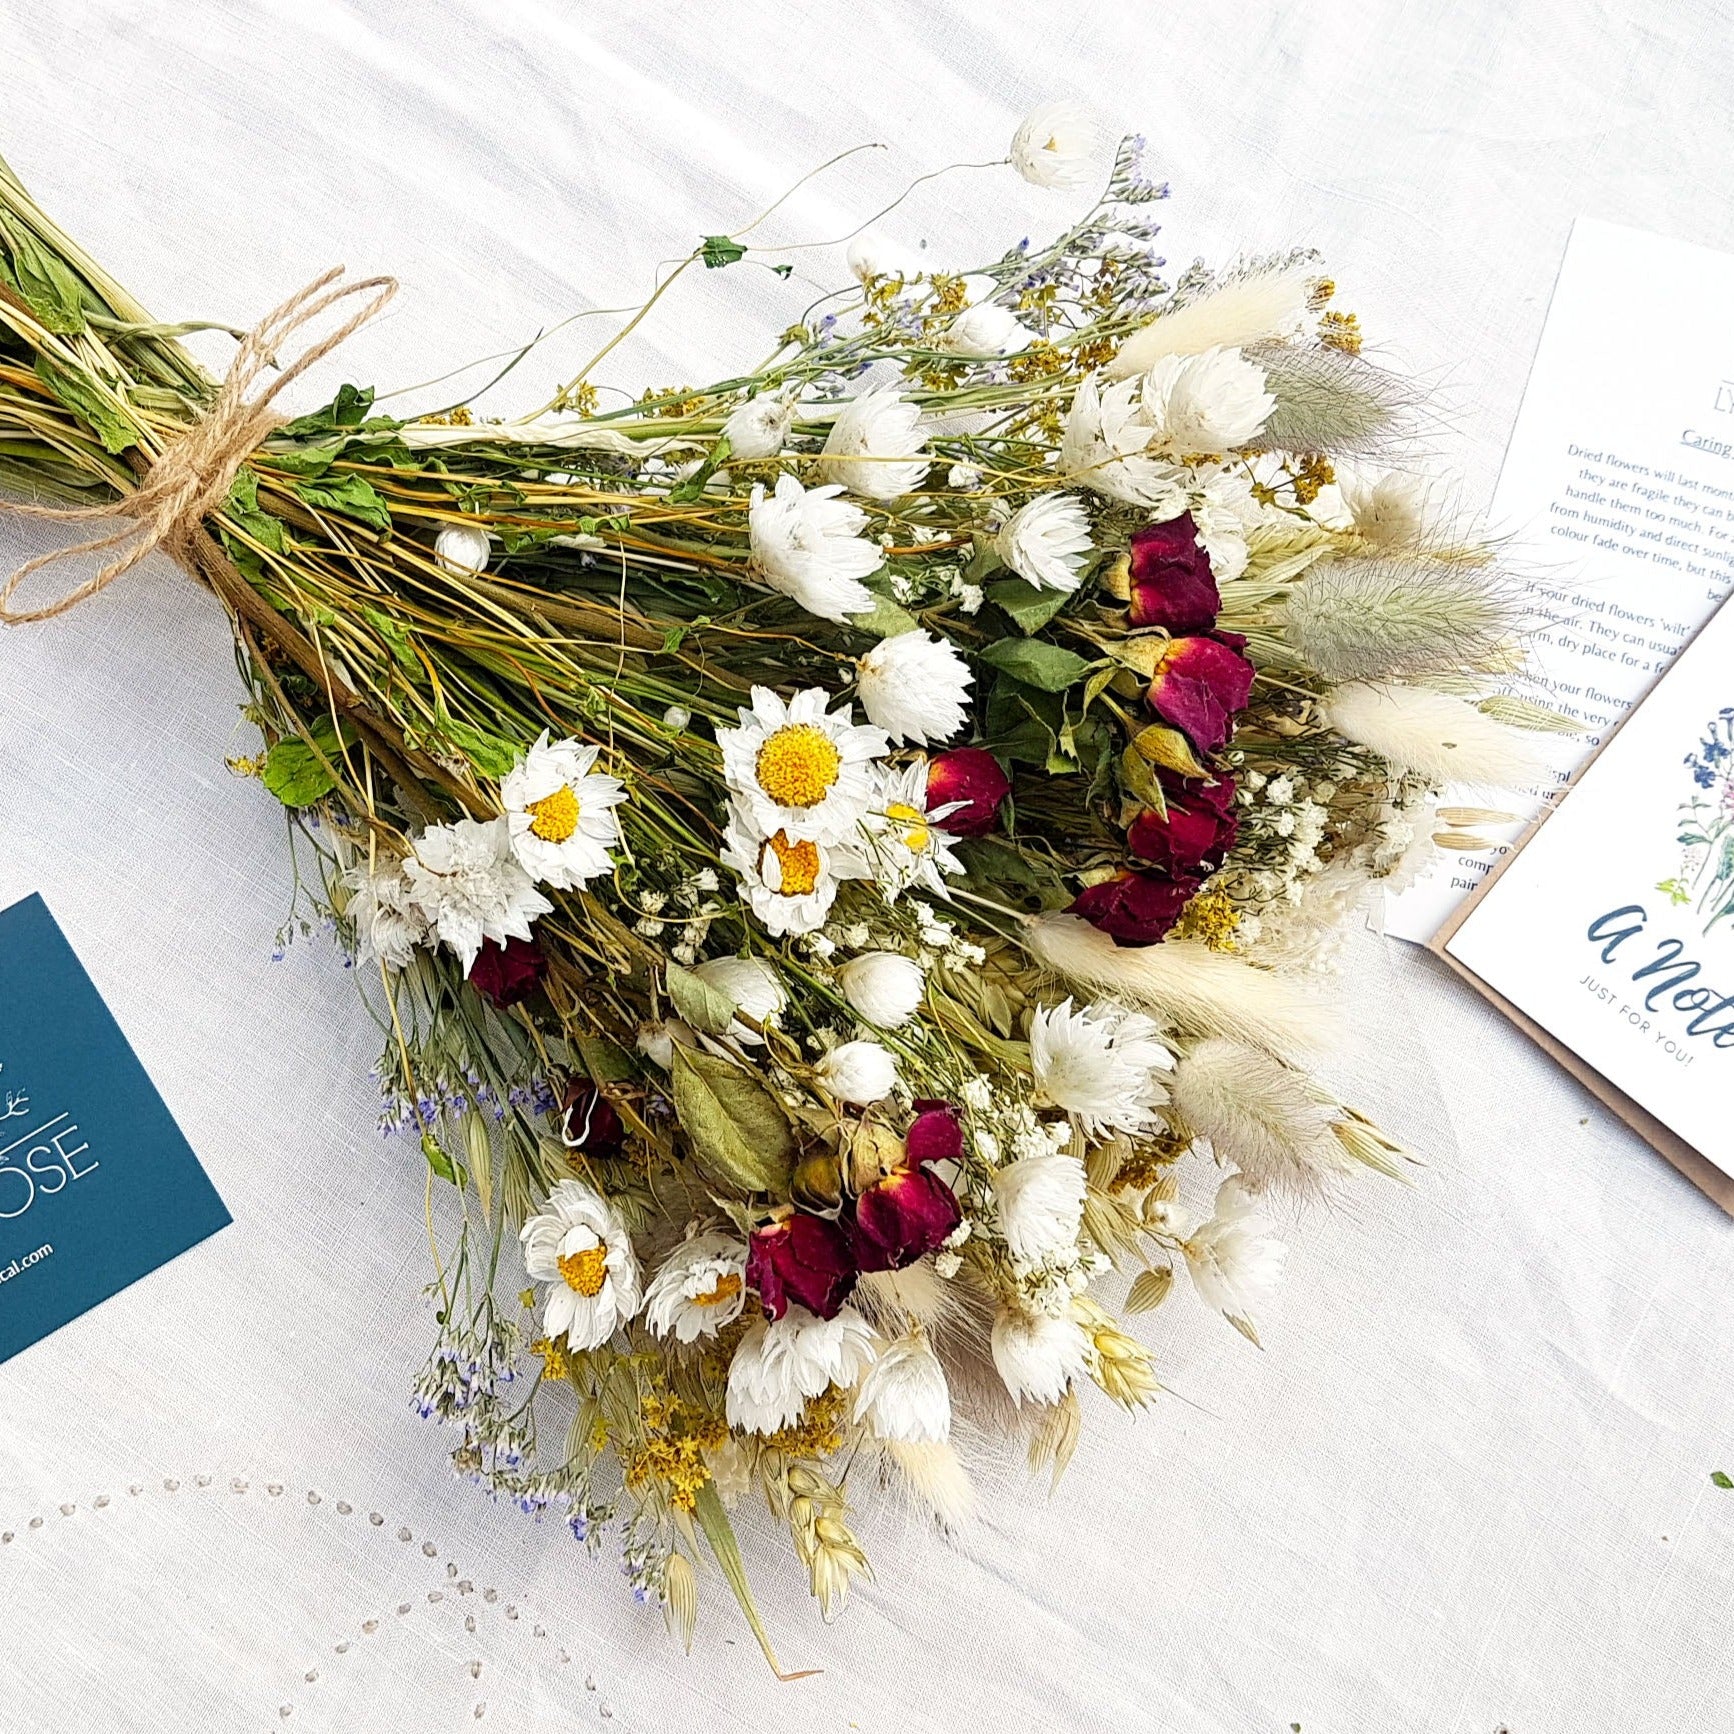 A close up image of the dried flower bouquet. It has small red roses, white daisies with yellow centres, blue toned purple sea lavender and pretty white gypsophila among other grasses and fillers. 